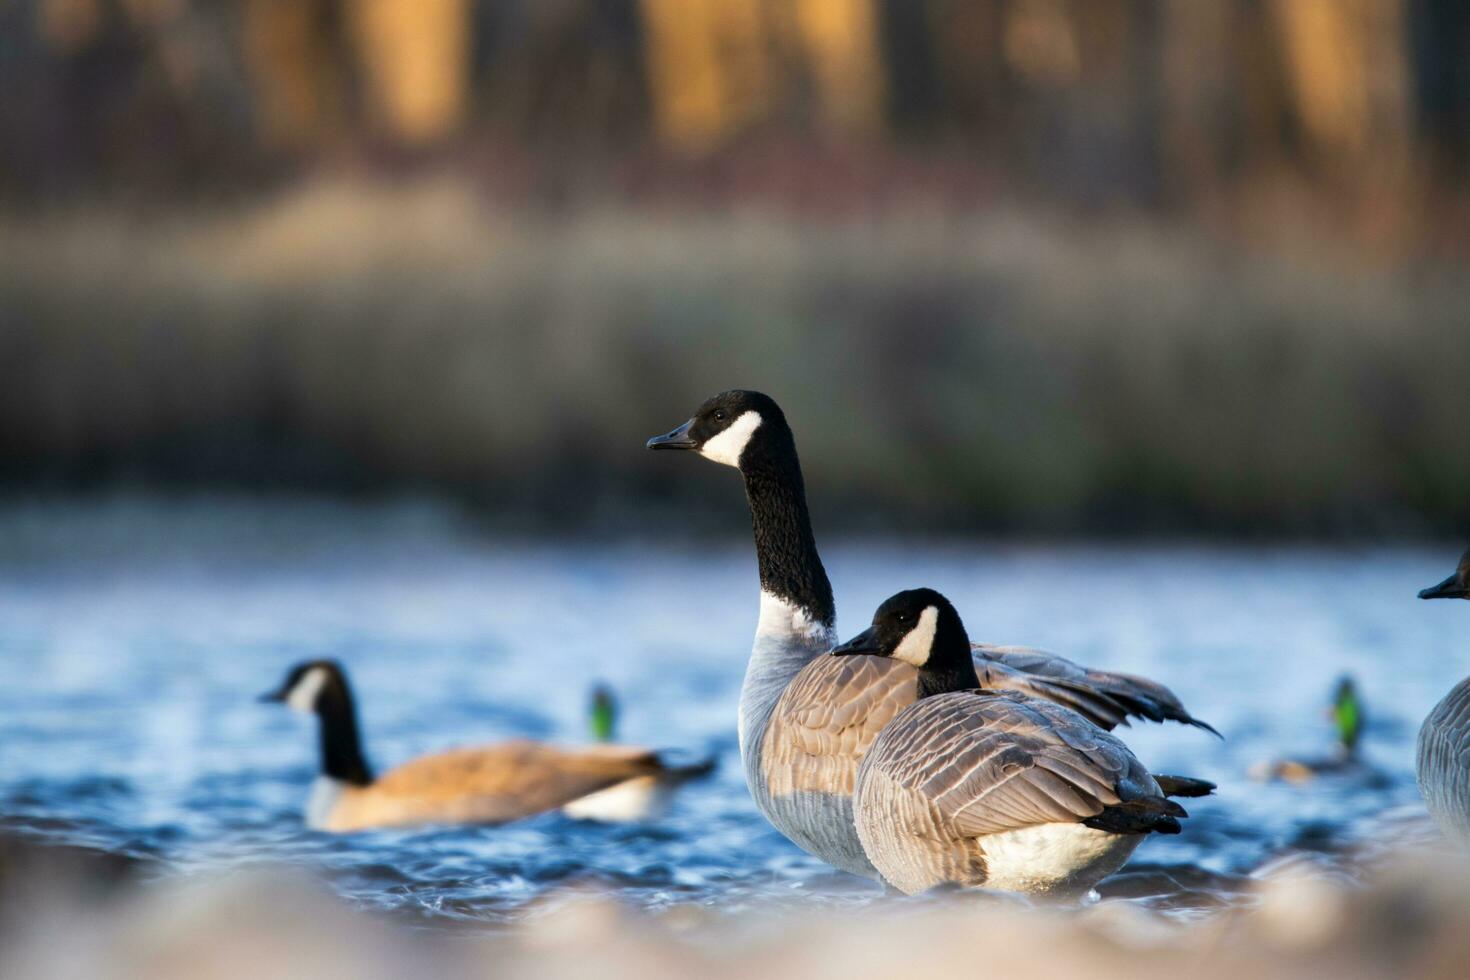 Geese sitting in a river photo